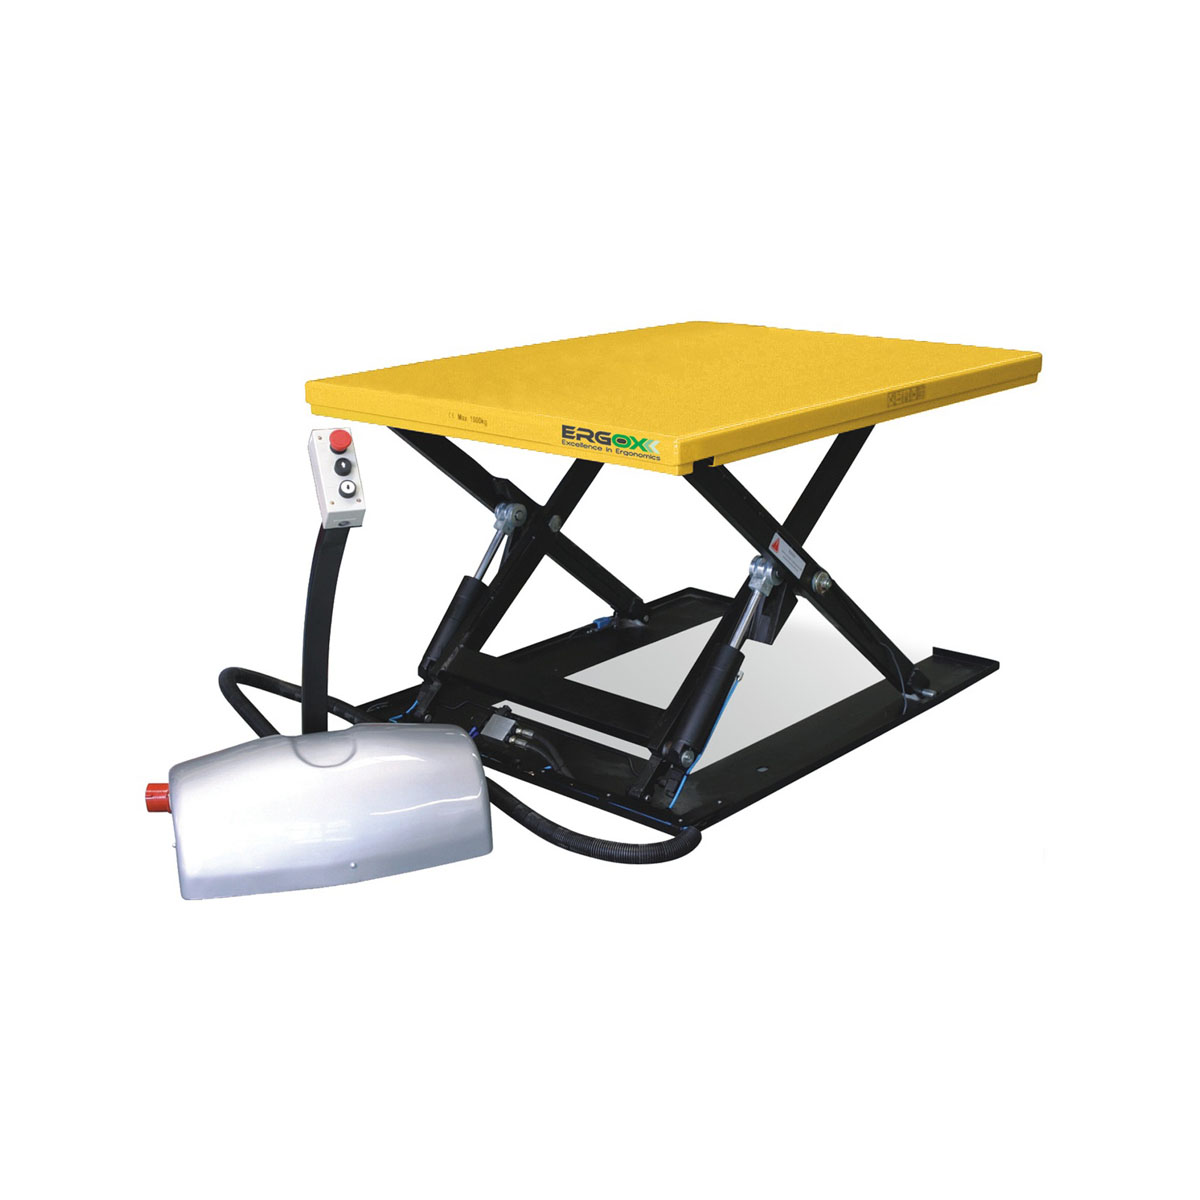 Buy Scissor Lift Table Low Entry-Level (Electric) in Scissor Lift Tables from Astrolift NZ